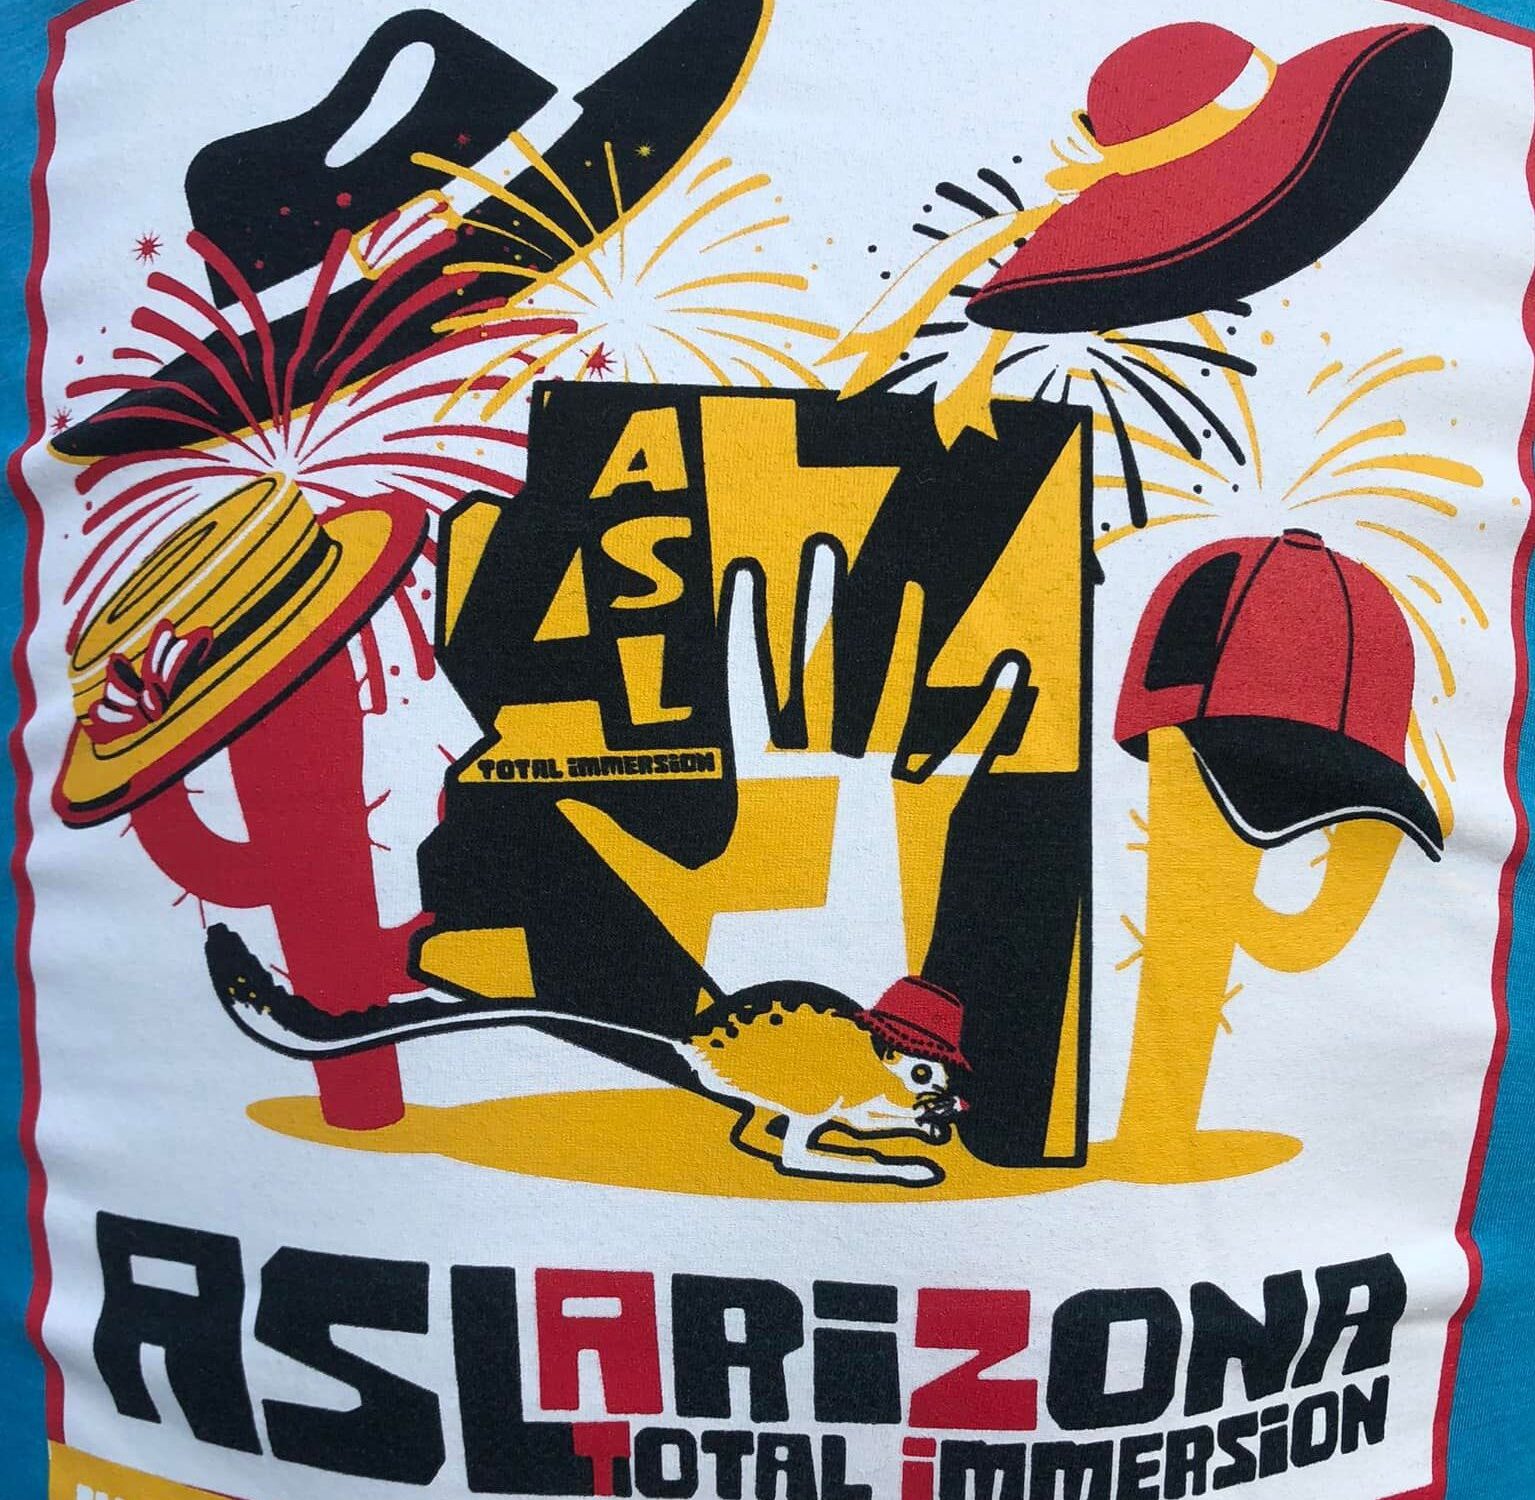 Back of the shirt– white rectangle against blue backgroud. Inside the rectangle are designs of a cowboy hat, cap, sun hat, a open-palm hand, a kangaroo, and text "ASL Arizona Total Immersion 2022". Theme colors are yellow, red and black.